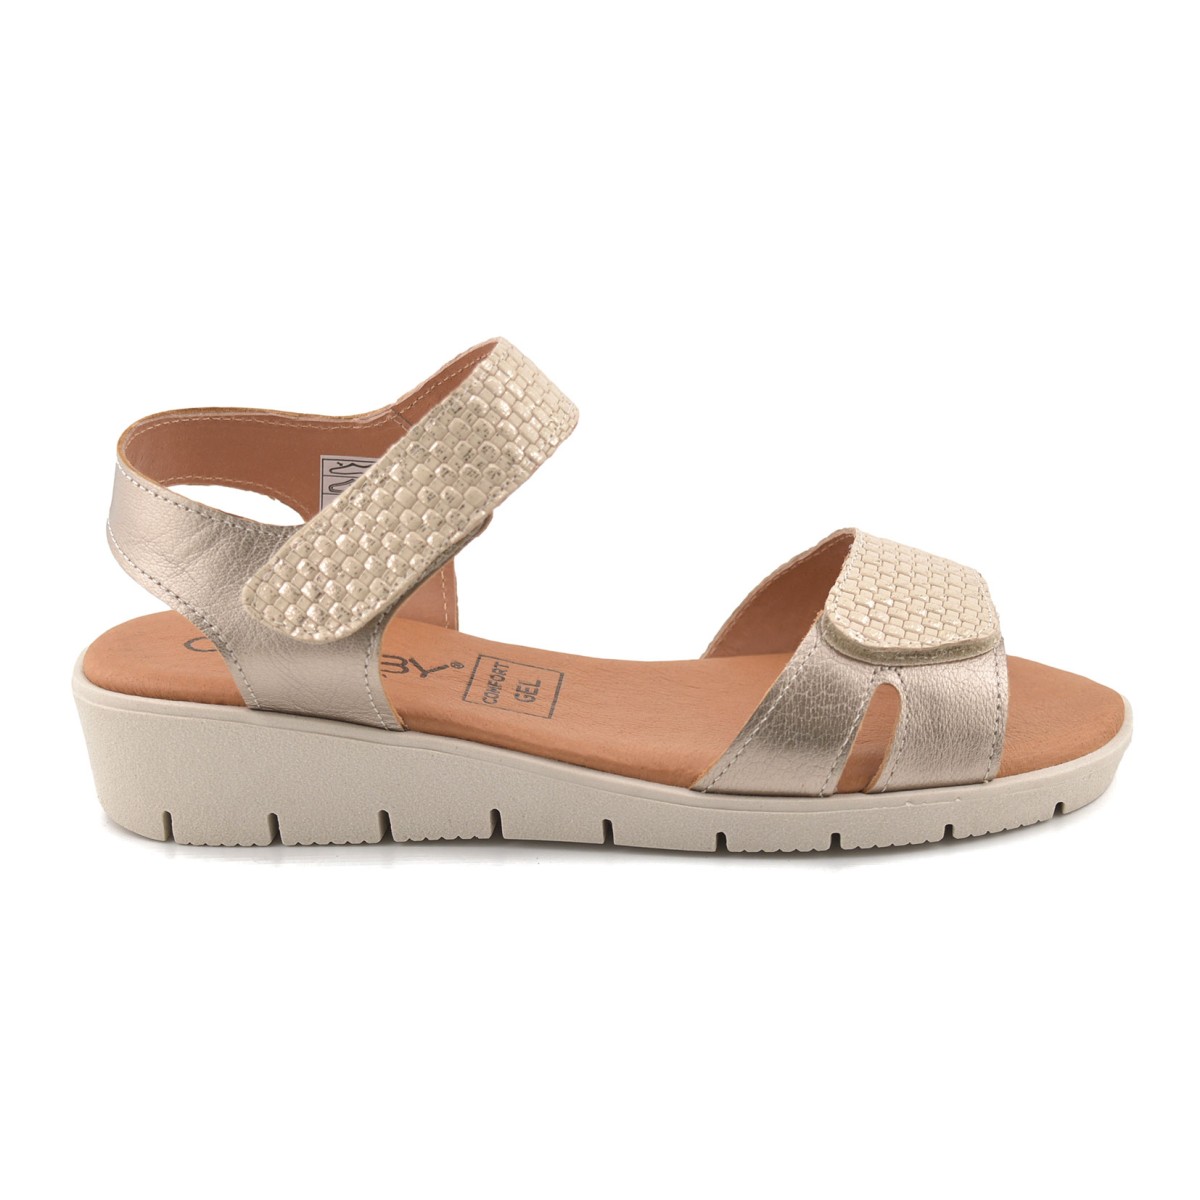 Metallic Leather Sandals by Chamby